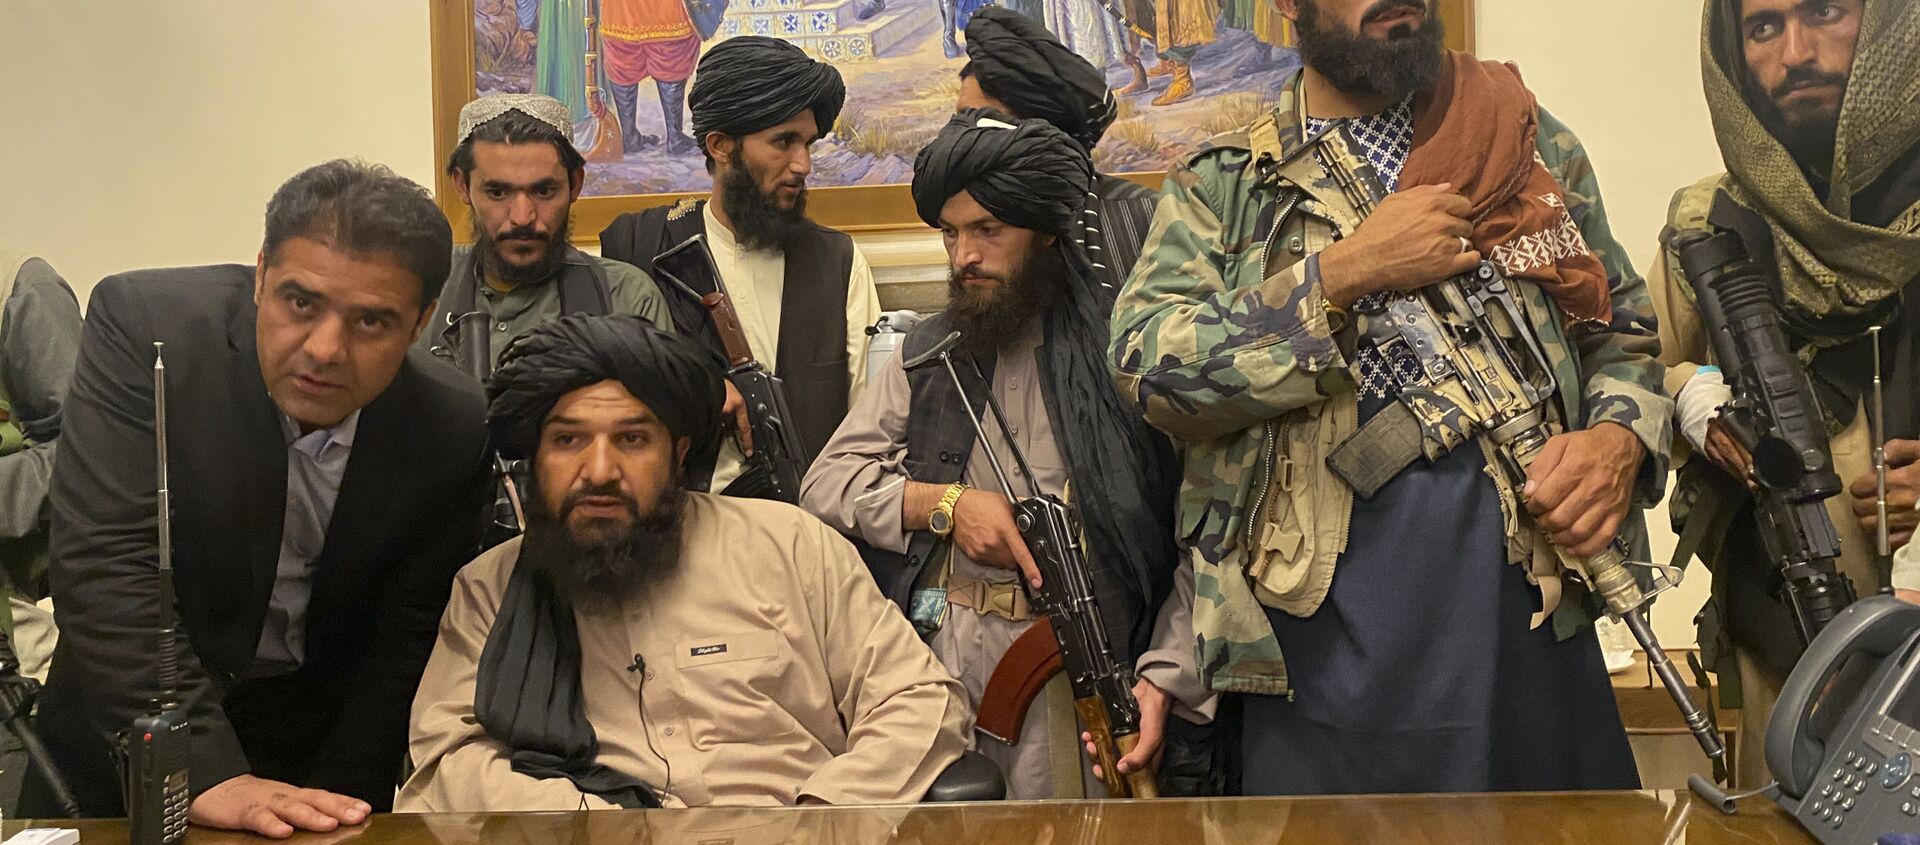 Taliban fighters take control of Afghan presidential palace after the Afghan President Ashraf Ghani fled the country, in Kabul, Afghanistan, Sunday, Aug. 15, 2021. - Sputnik International, 1920, 17.08.2021